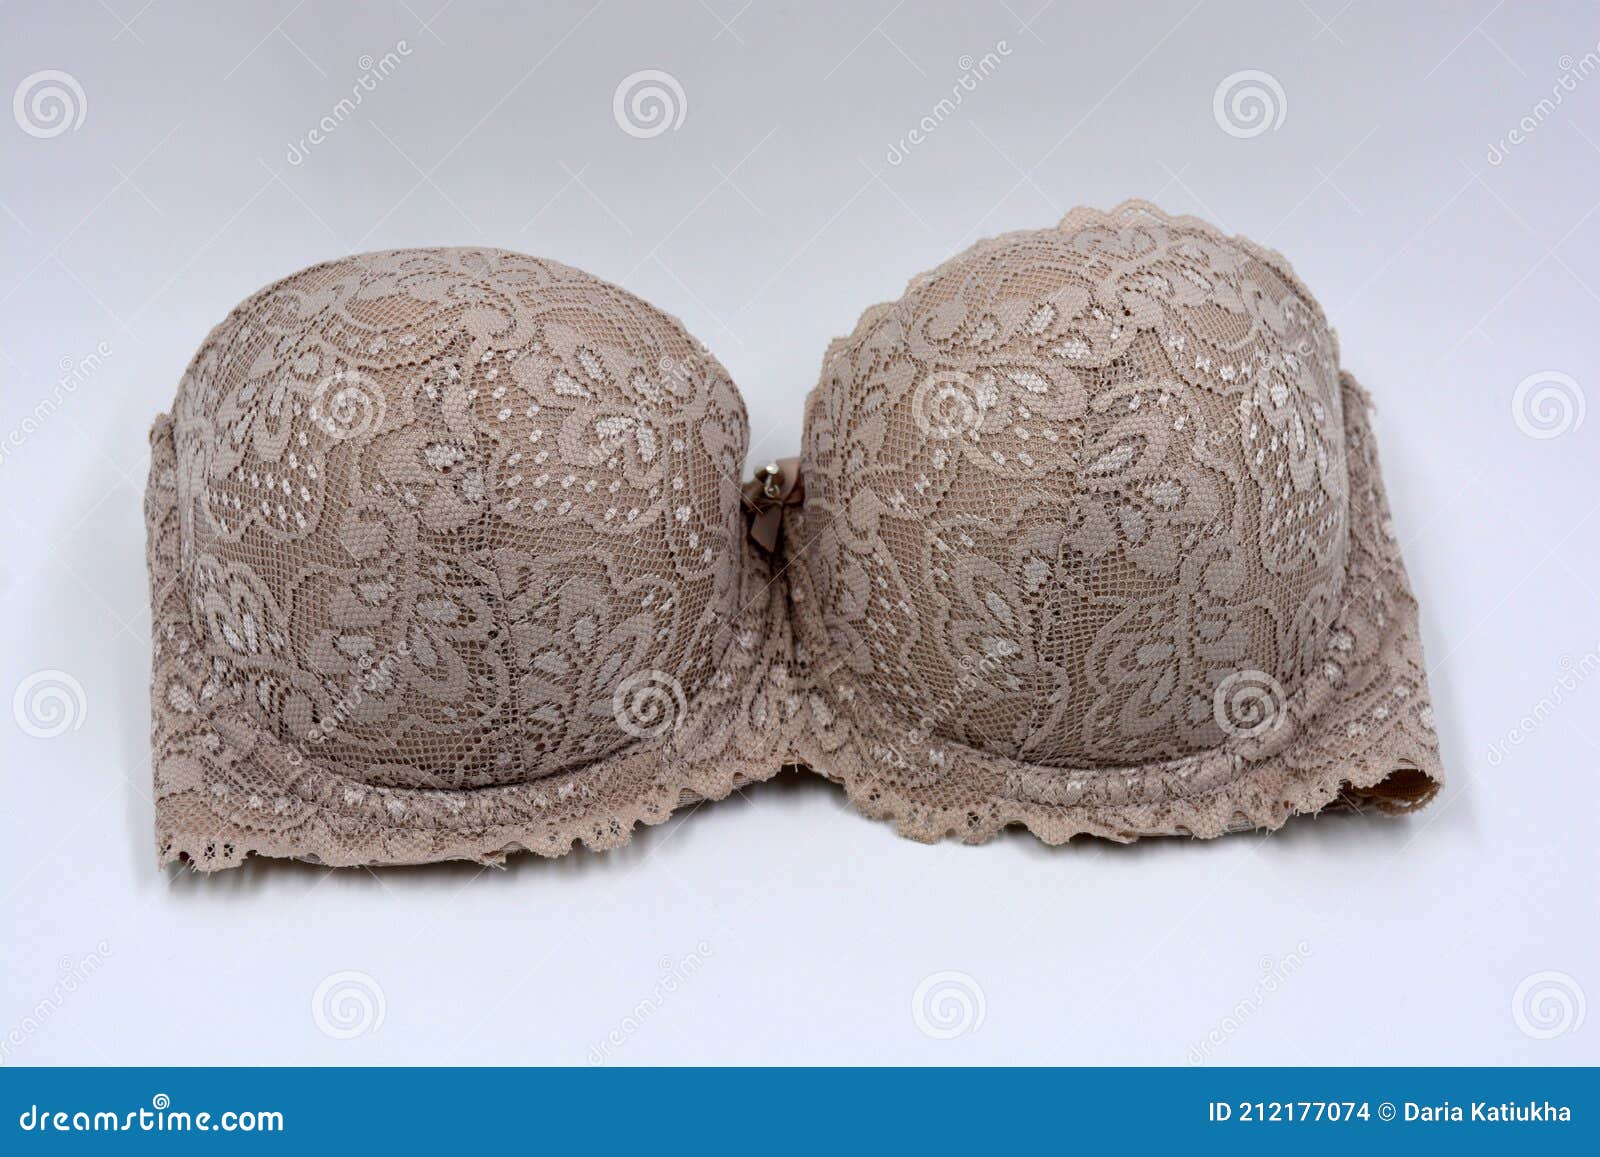 Handsome Brown, Bodily Female Bra with Pitpus, Lingerie Located on White  Background. Stock Photo - Image of country, ball: 212177074